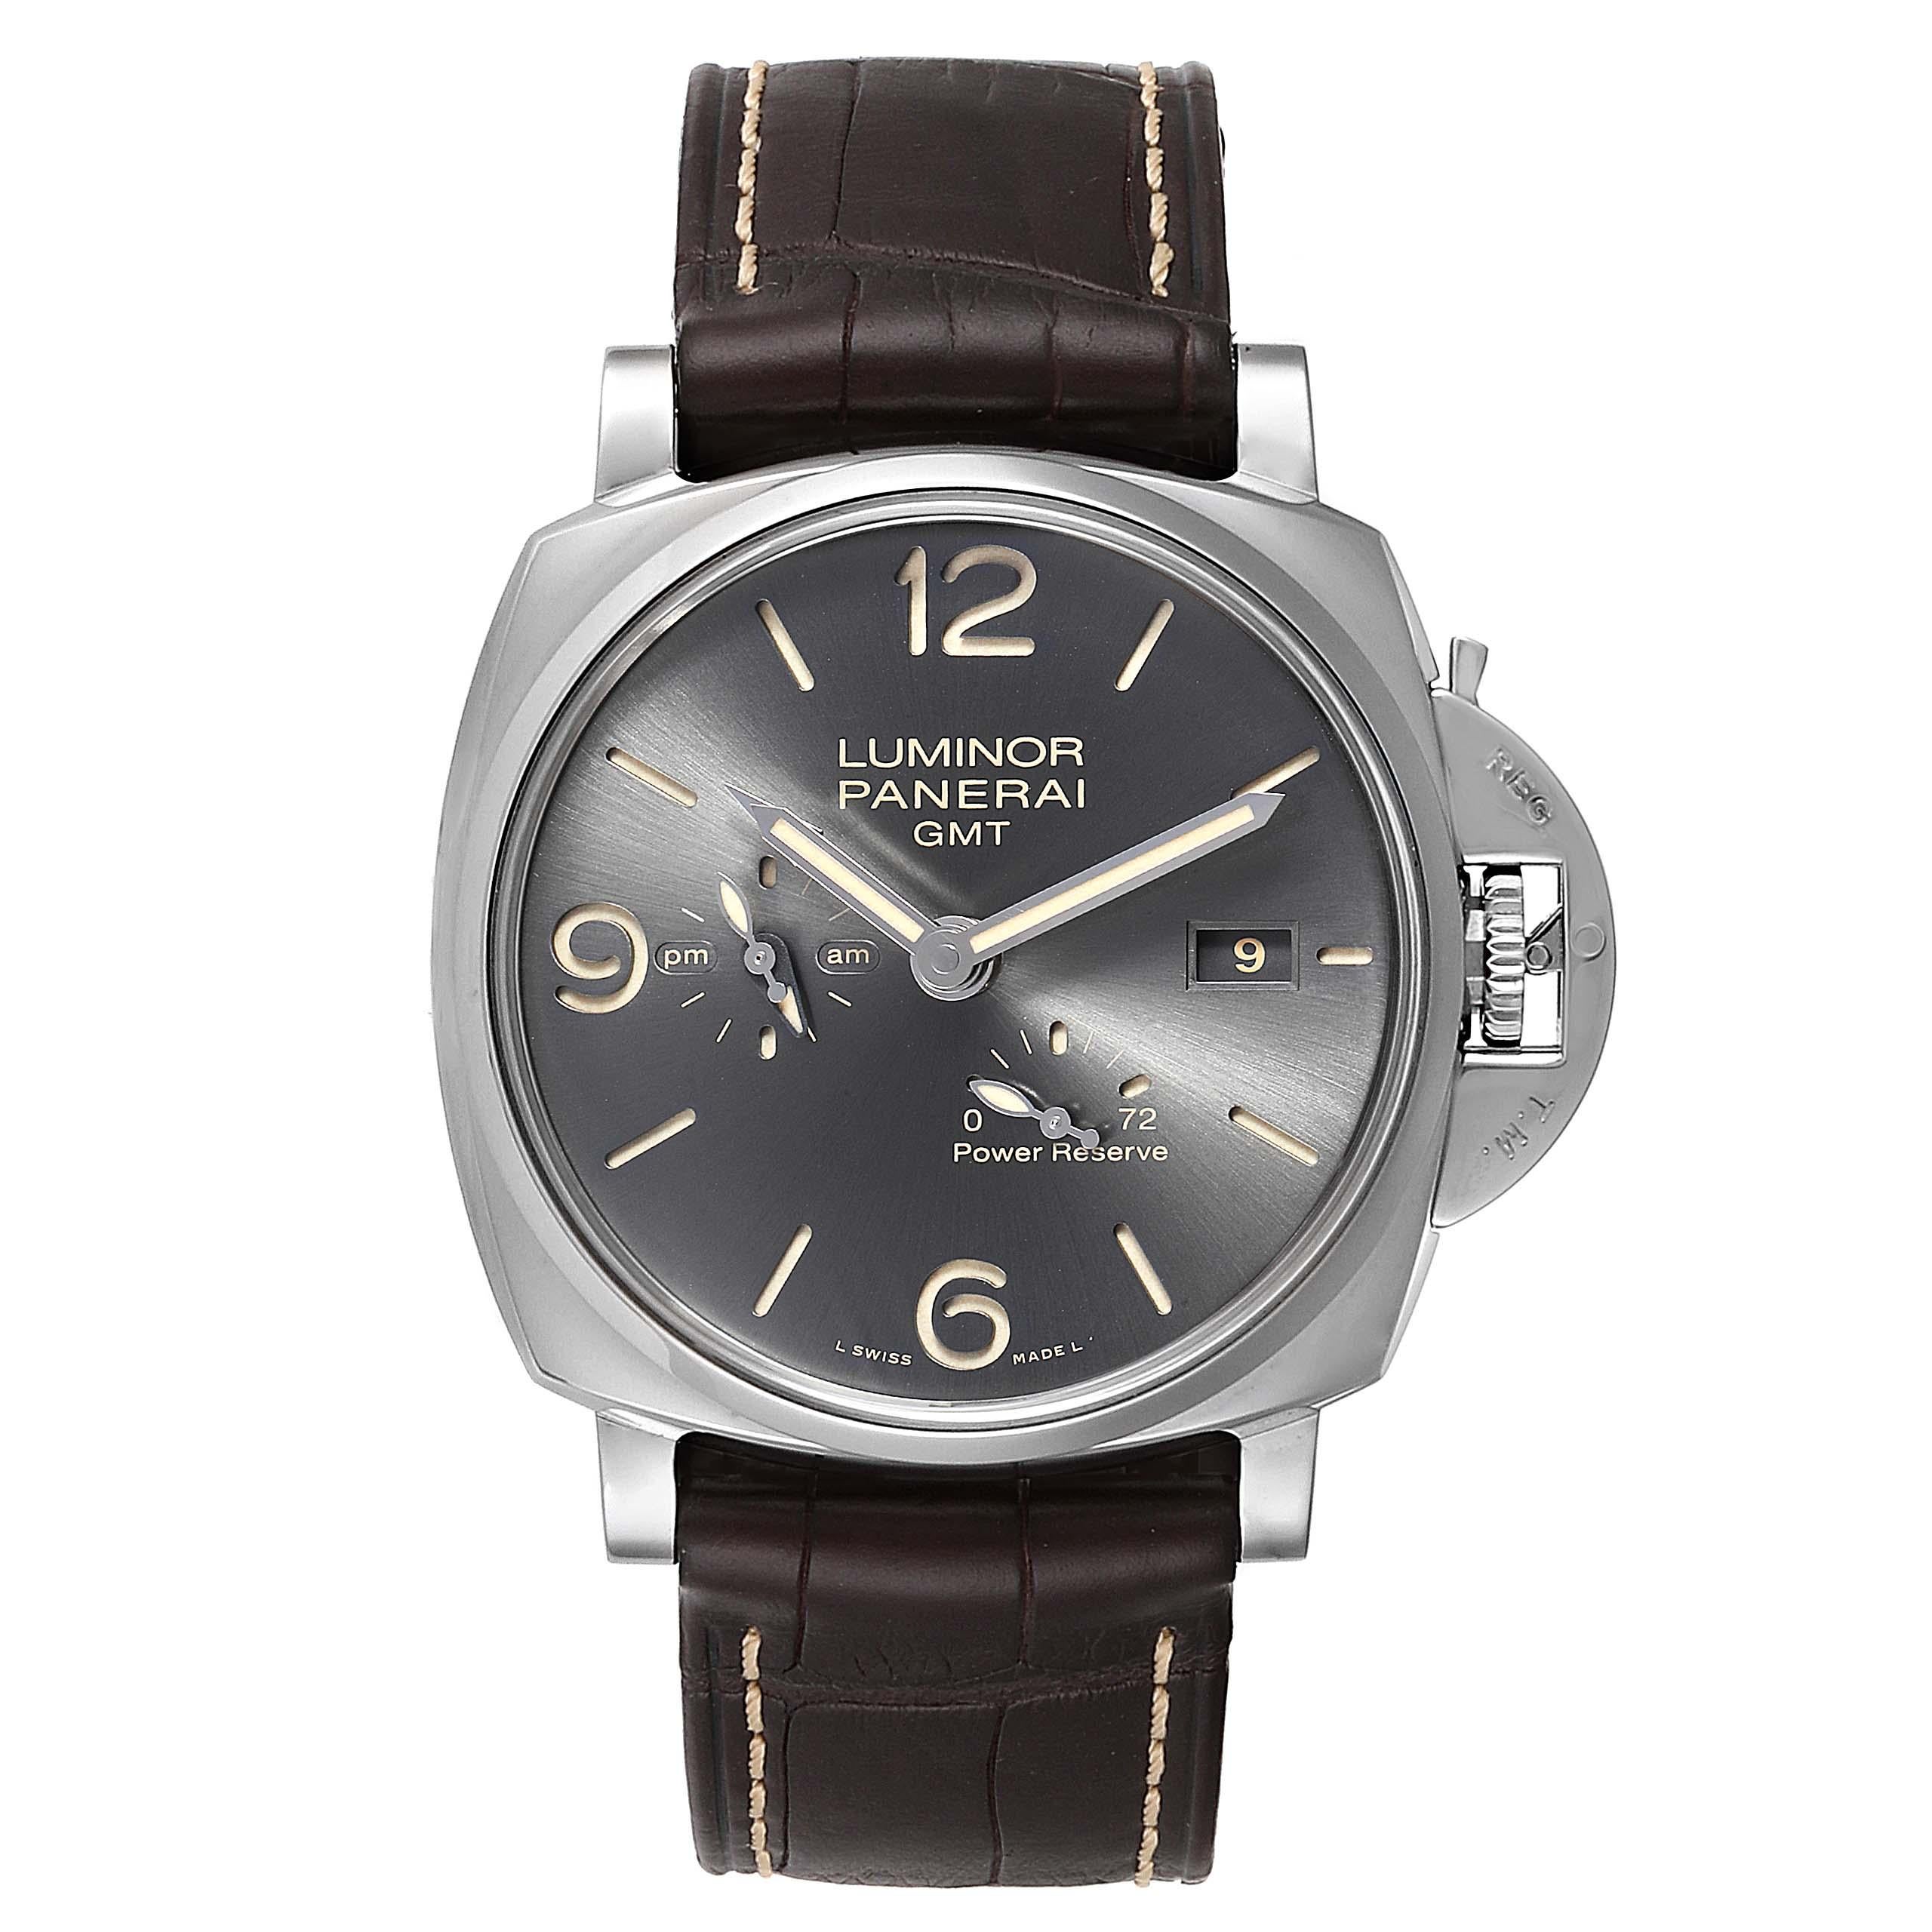 Panerai Luminor Due GMT Anthracite Dial Automtic Mens Watch PAM00944. Automatic self-winding movement. Stainless steel cushion shaped case 45.0 mm in diameter. Polished Panerai patented crown protector. Exhibition sapphire crystal case back.